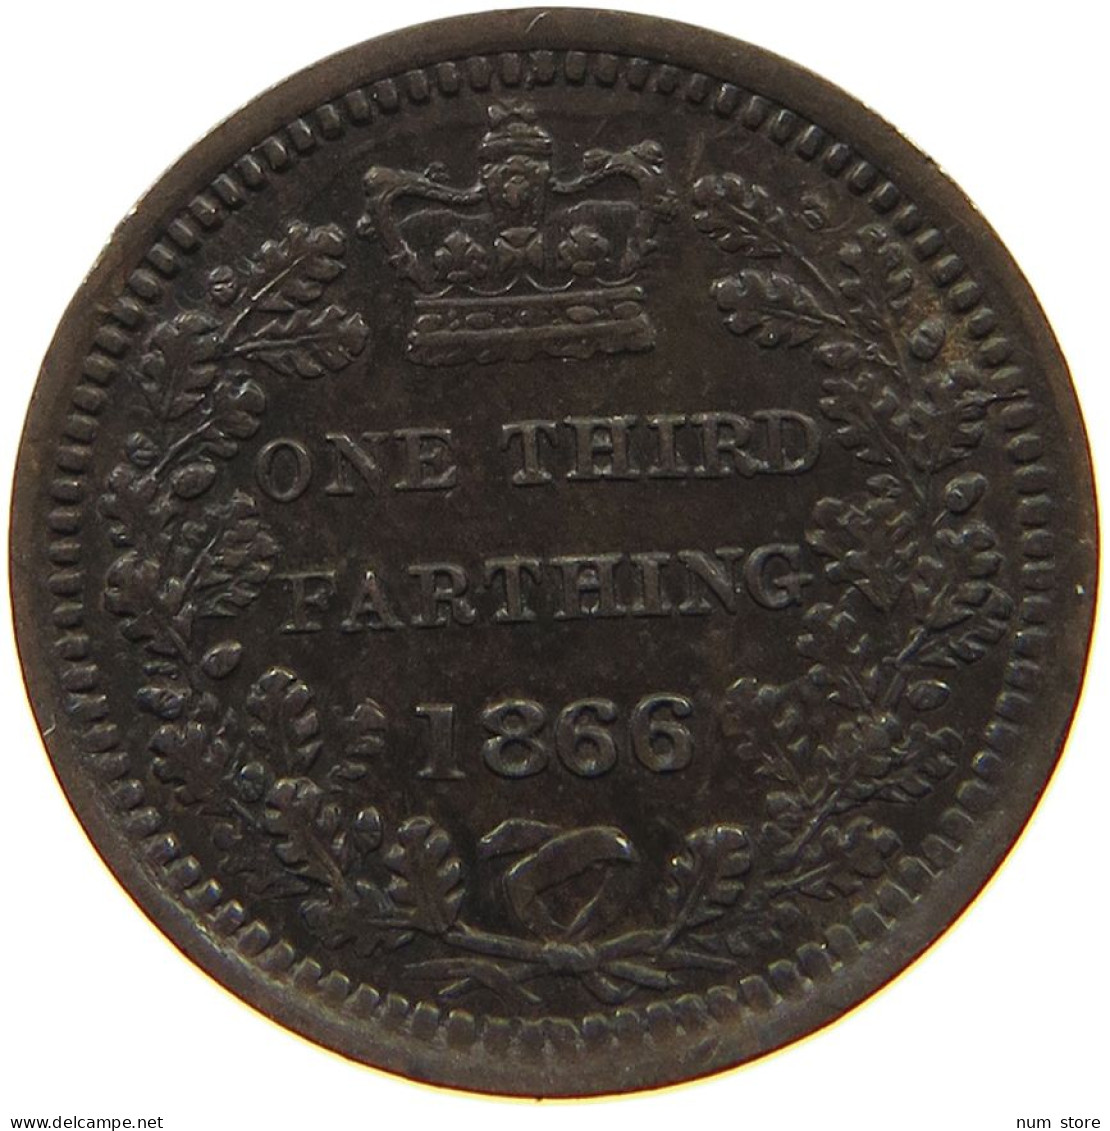 GREAT BRITAIN 1/3 FARTHING 1866 VICTORIA (1837-1901) #MA 008693 - A. 1/4 - 1/3 - 1/2 Farthing